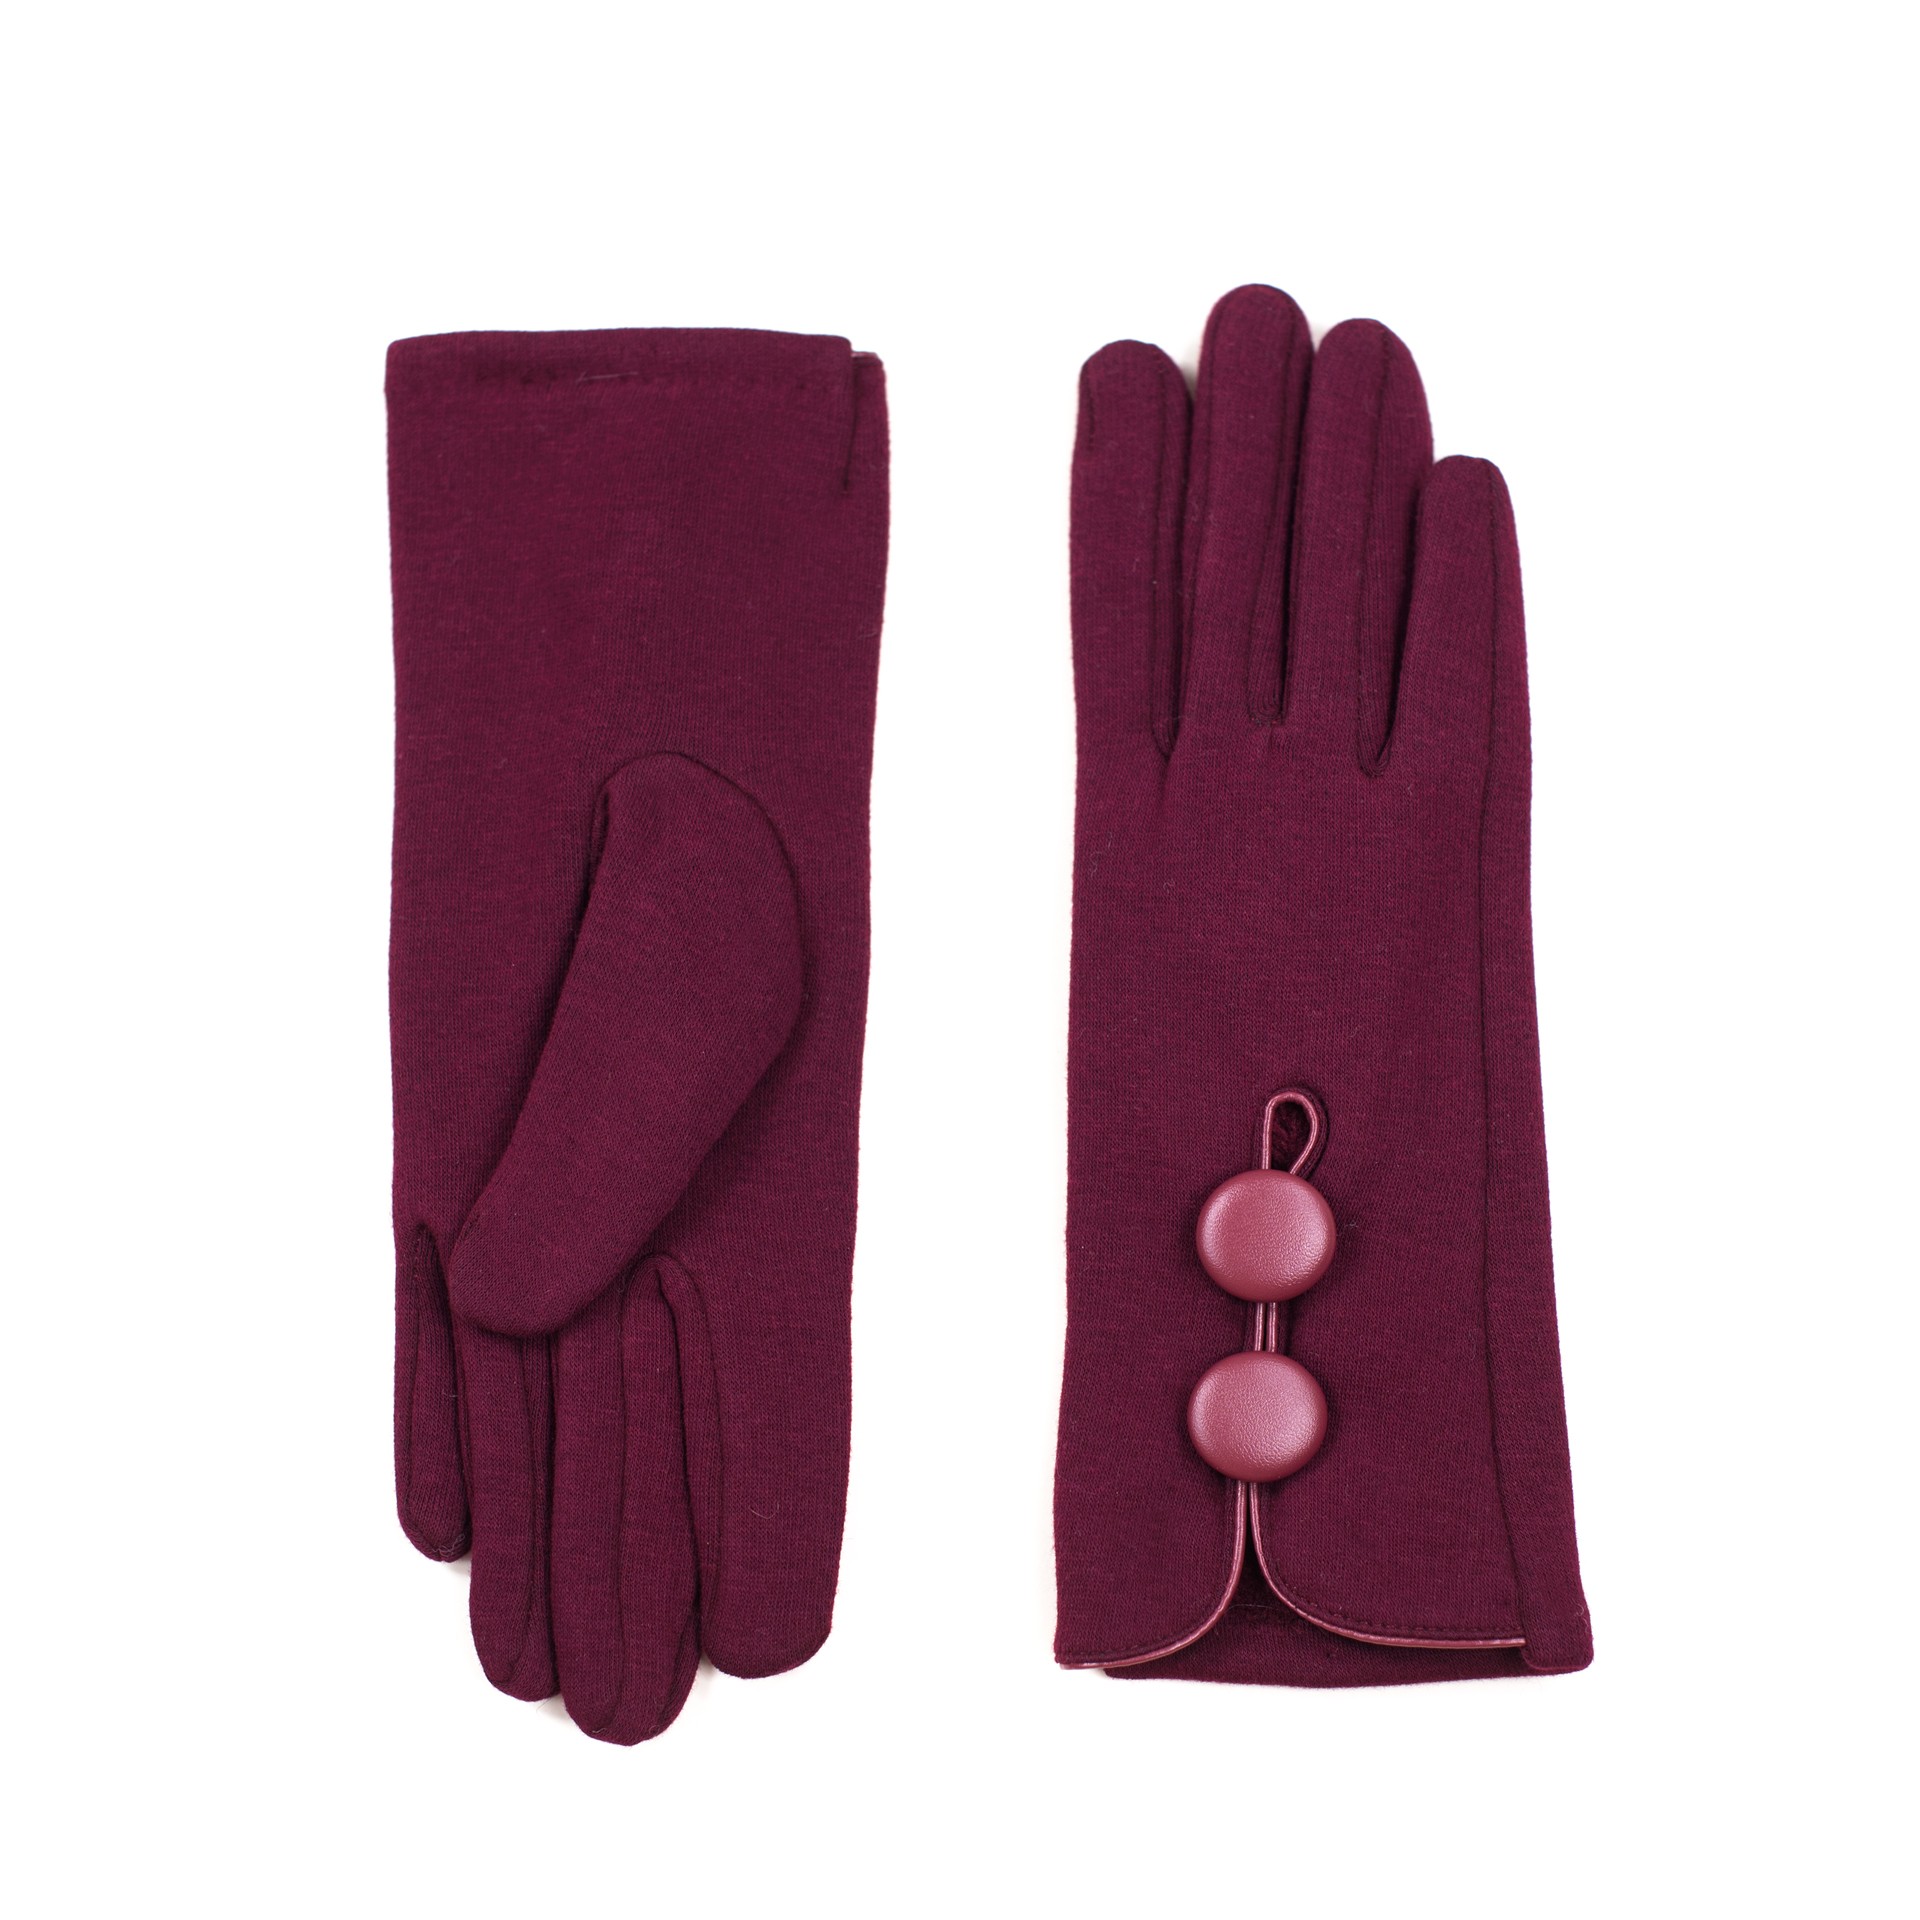 Art Of Polo Woman's Gloves Rk18302